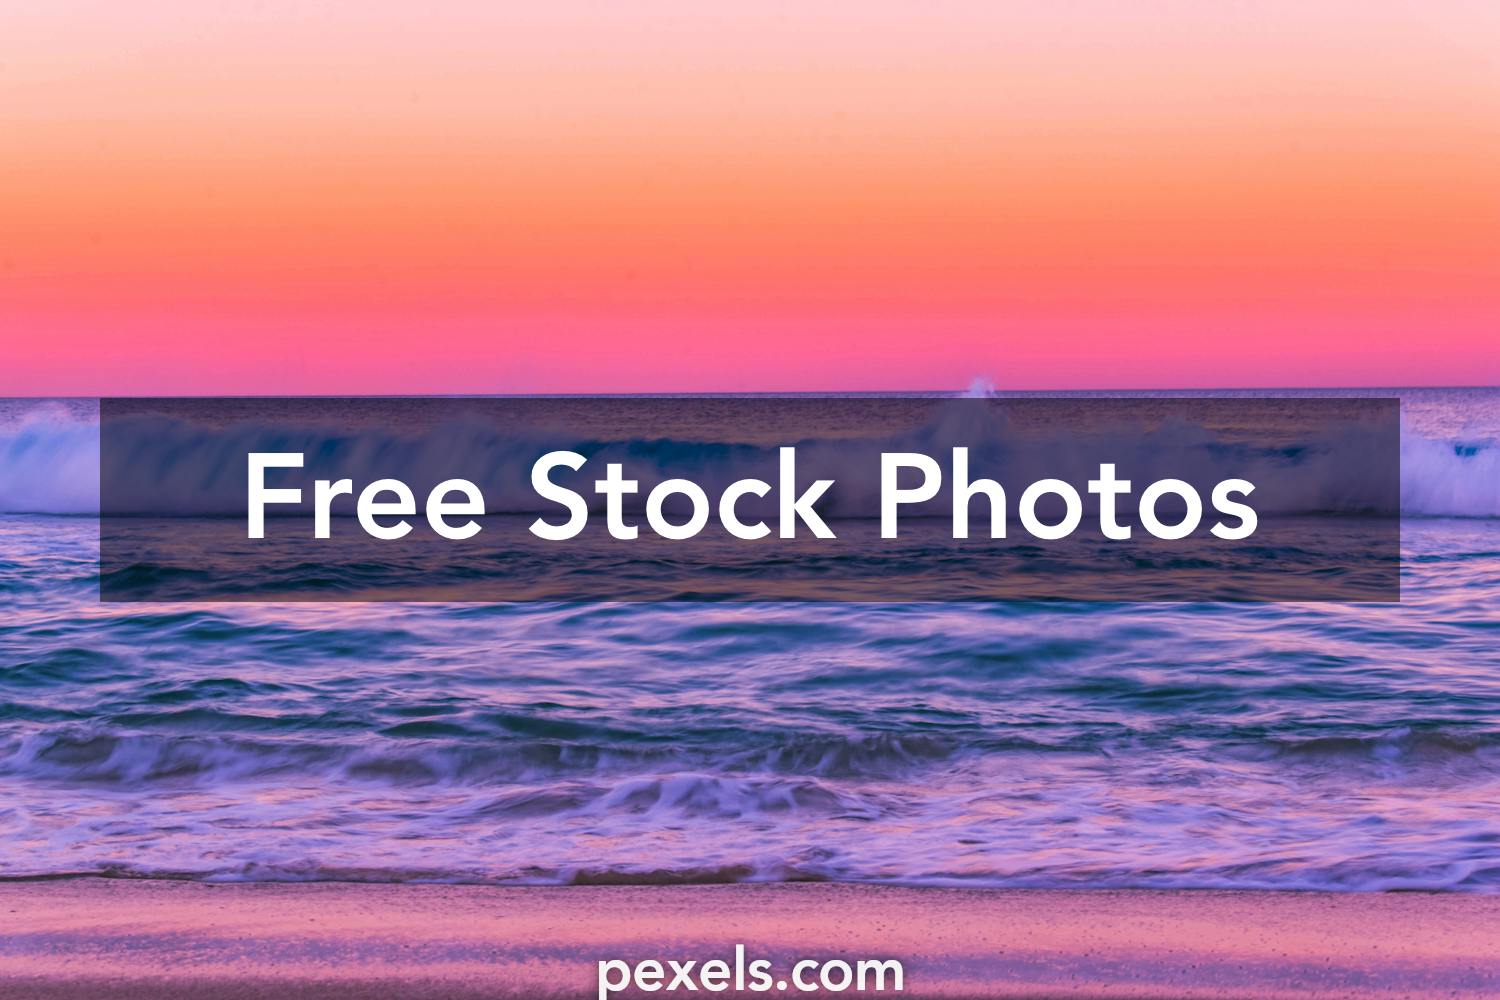 What are some free ocean background stock photos available for download and use?